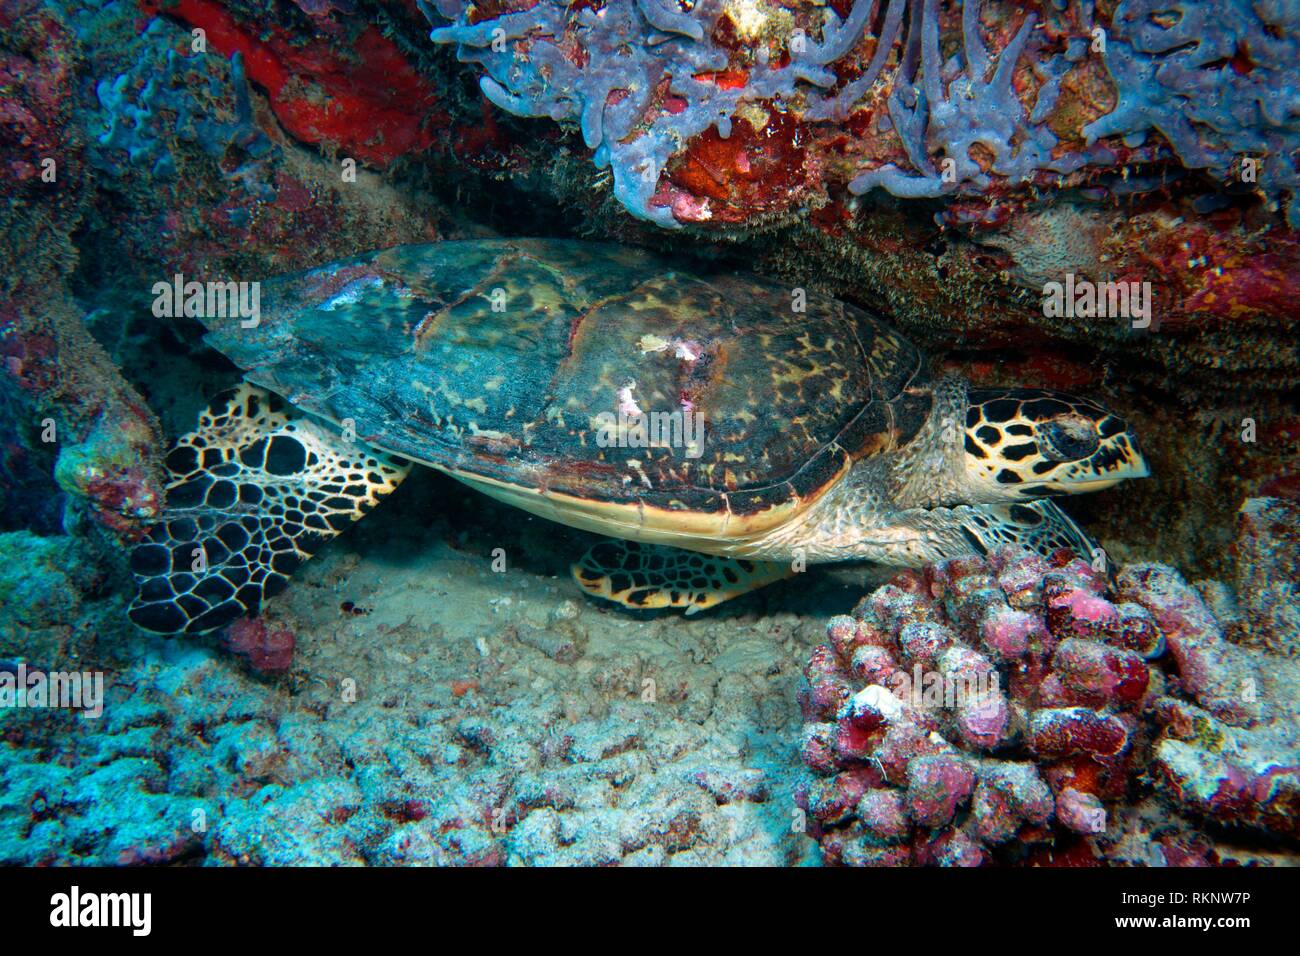 Hawksbill sea turtle (Eretmochelys imbricata) laying on the reef between corals, Indian Ocean, Maledives, South Asia. Stock Photo